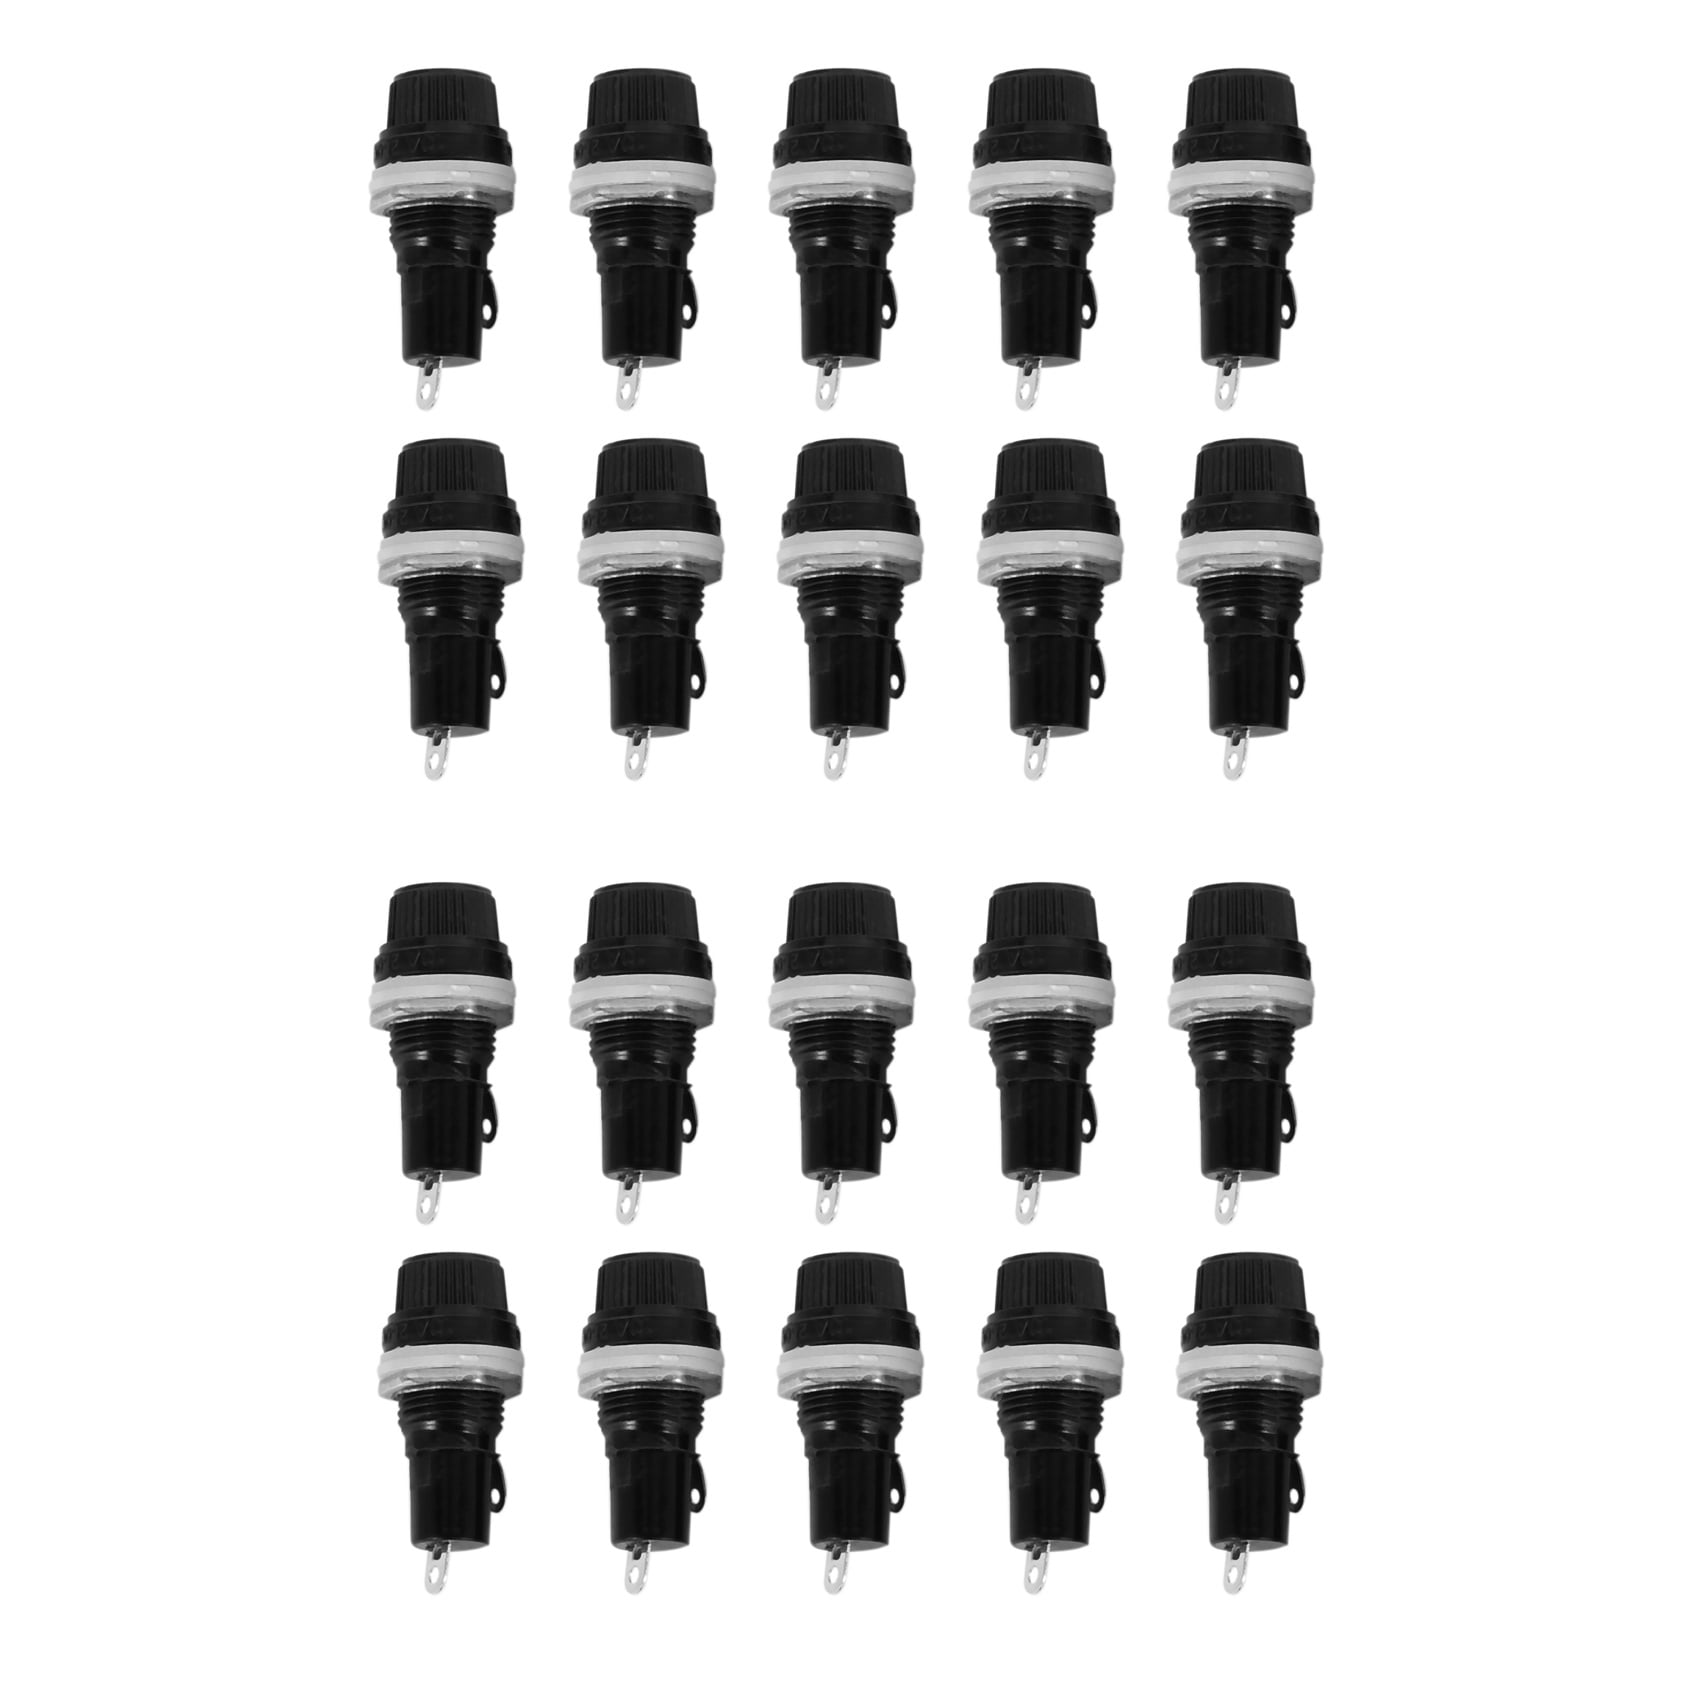 20 Pcs Electrical Panel Screw Mounted 5 x 20mm Fuse Holder 